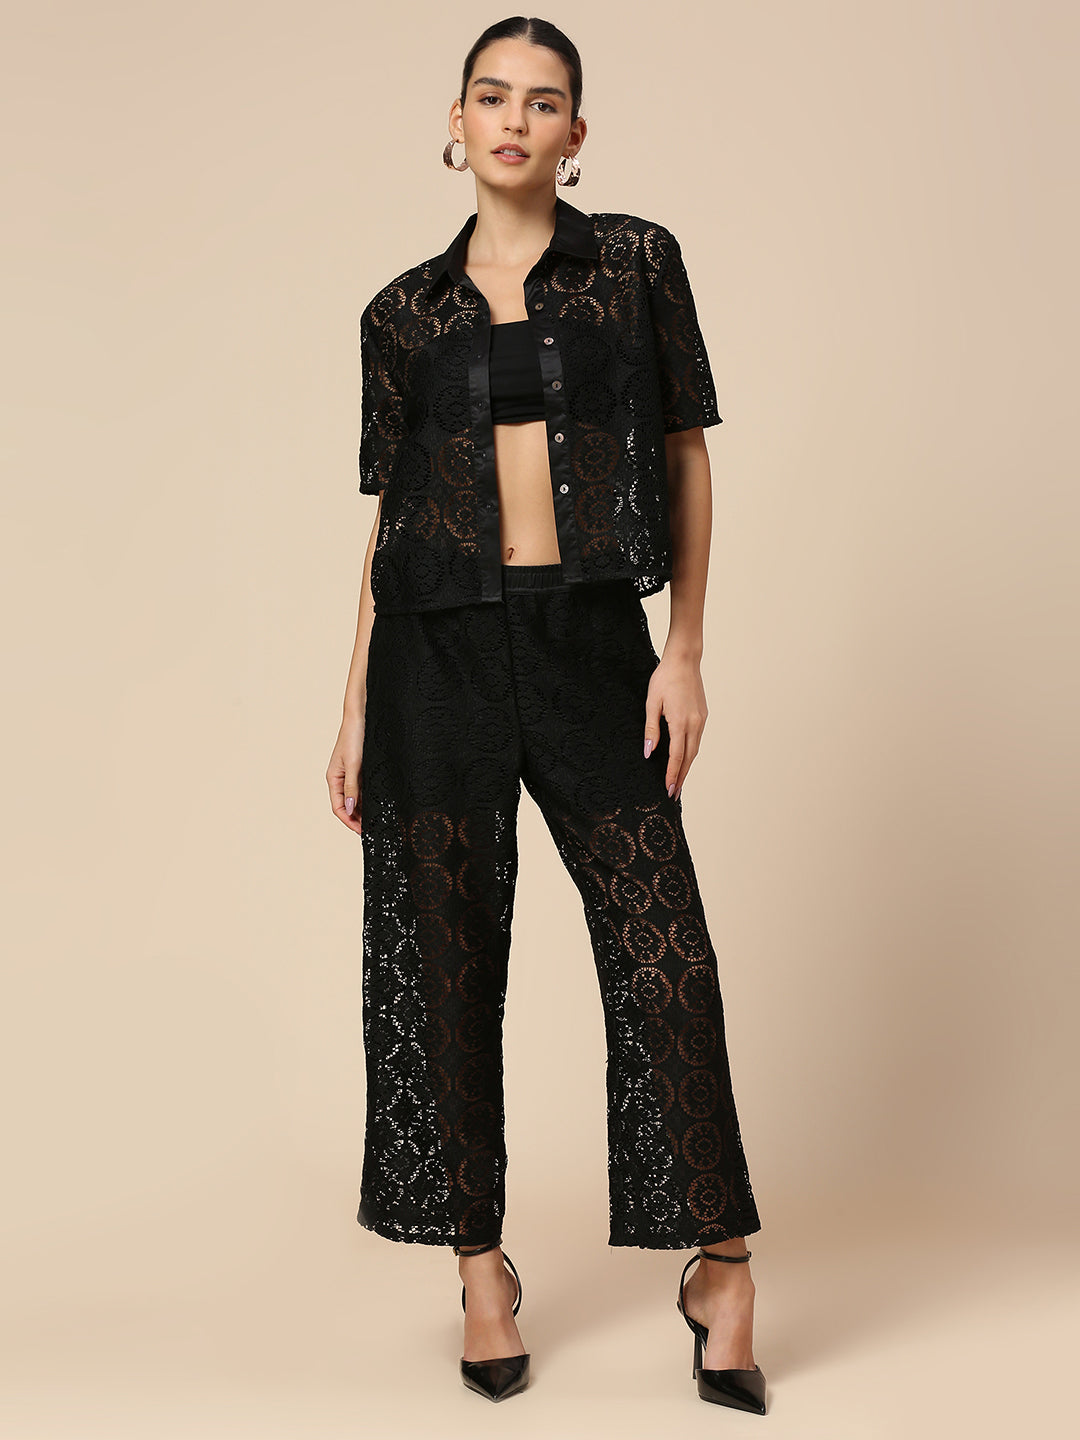 LACE HEAD TO TOE CO-ORD SET WITH SATIN TRIMMED SHIRT & LINED PULL ON PANTS